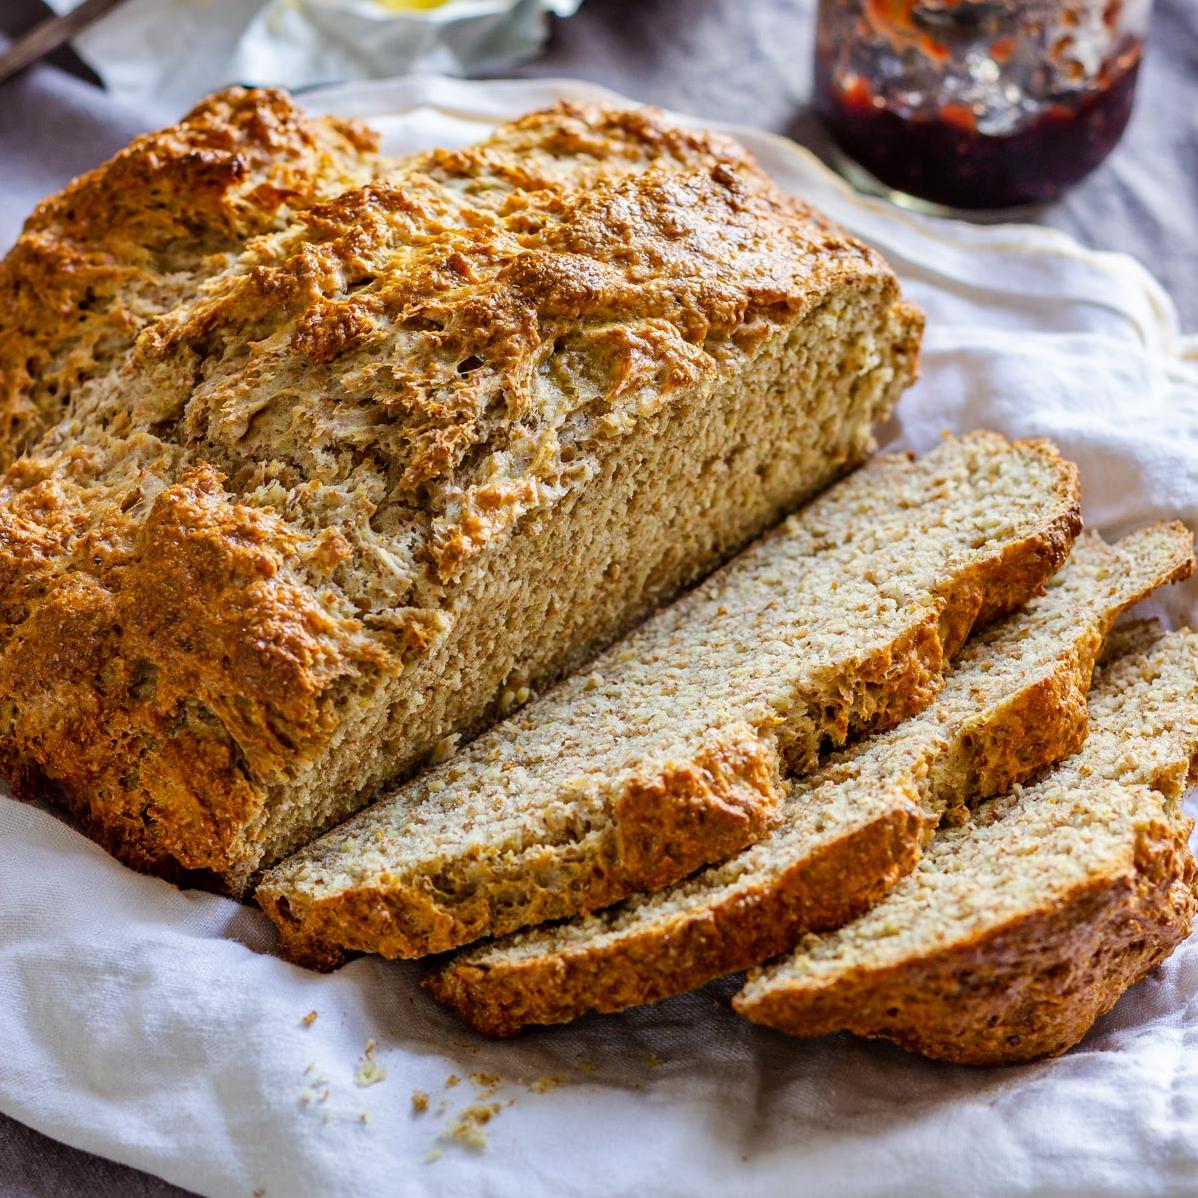  It's a blend of whole wheat flour and bread flour that gives this soda bread its rich flavor and texture.